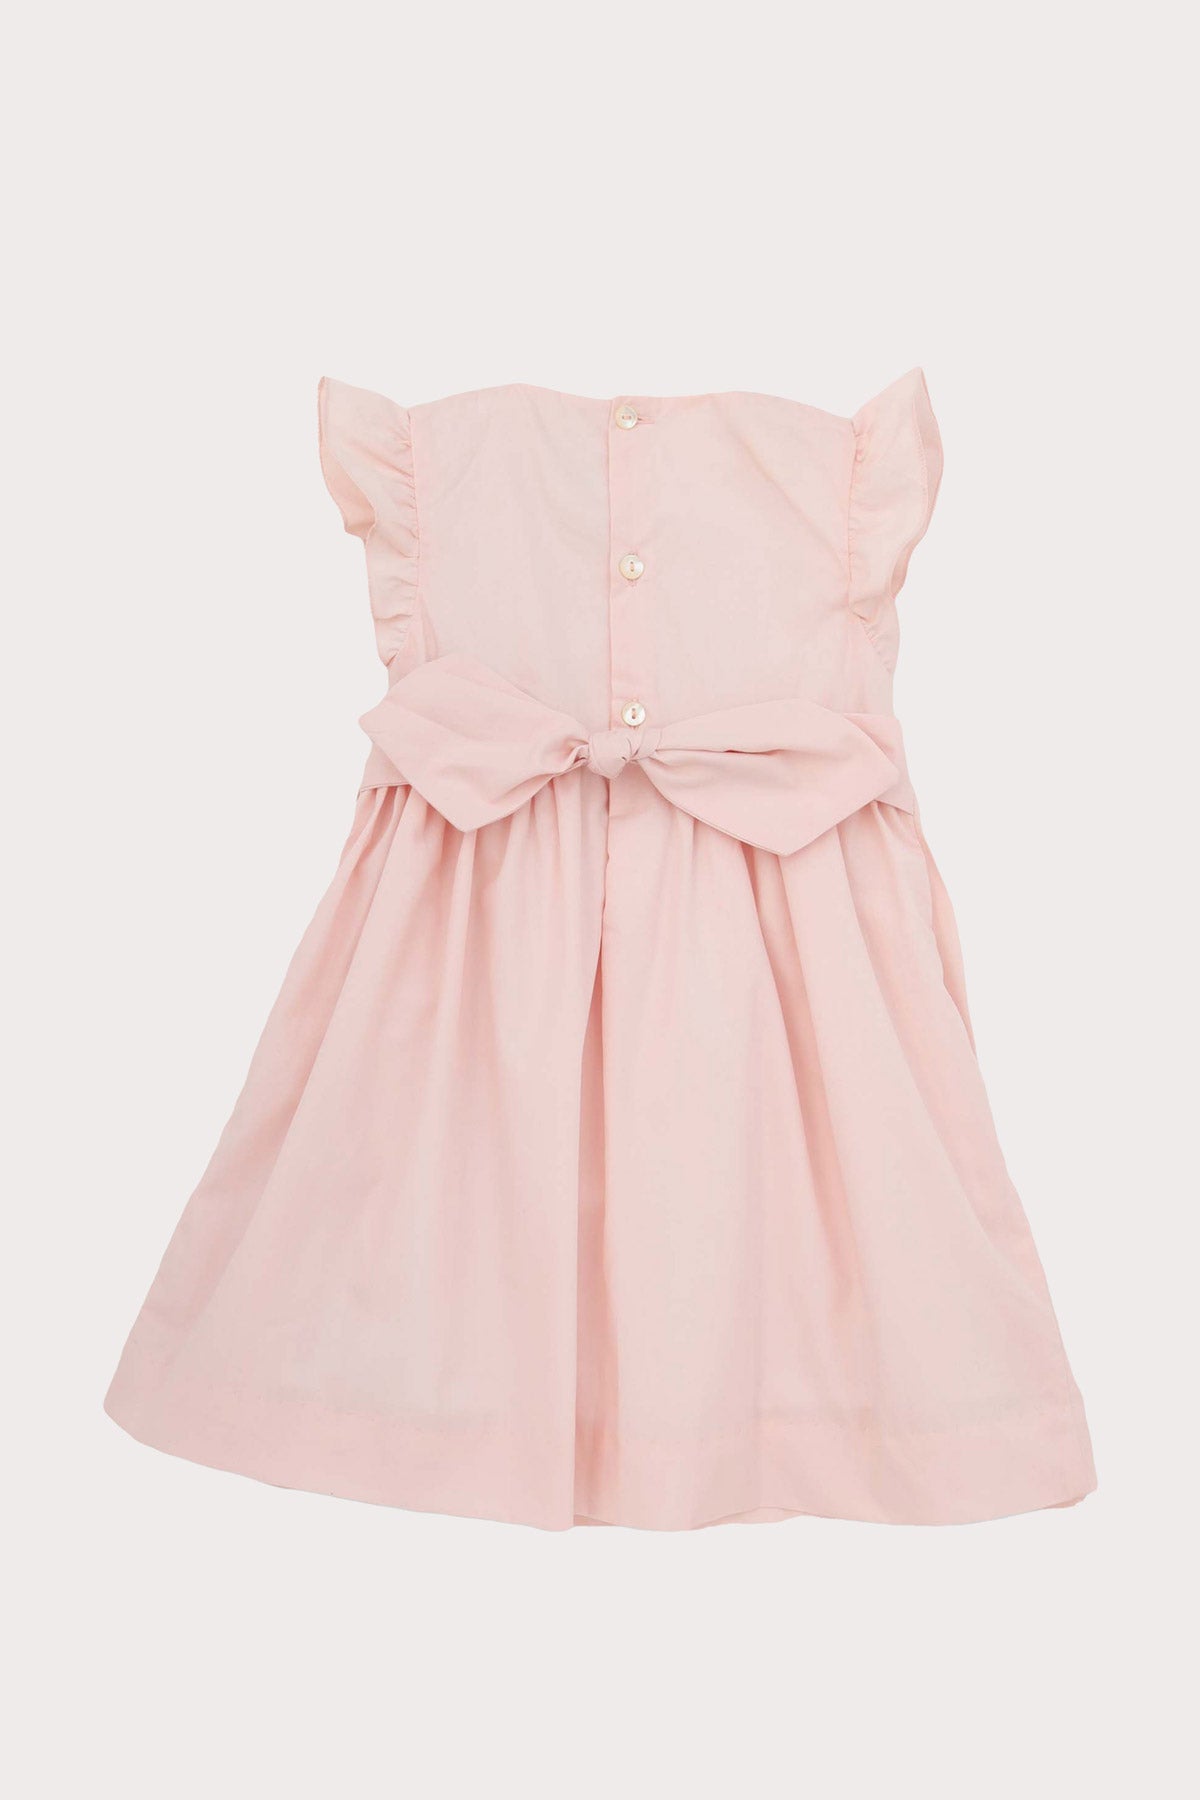 girls classic hand smocked dress with tie bow